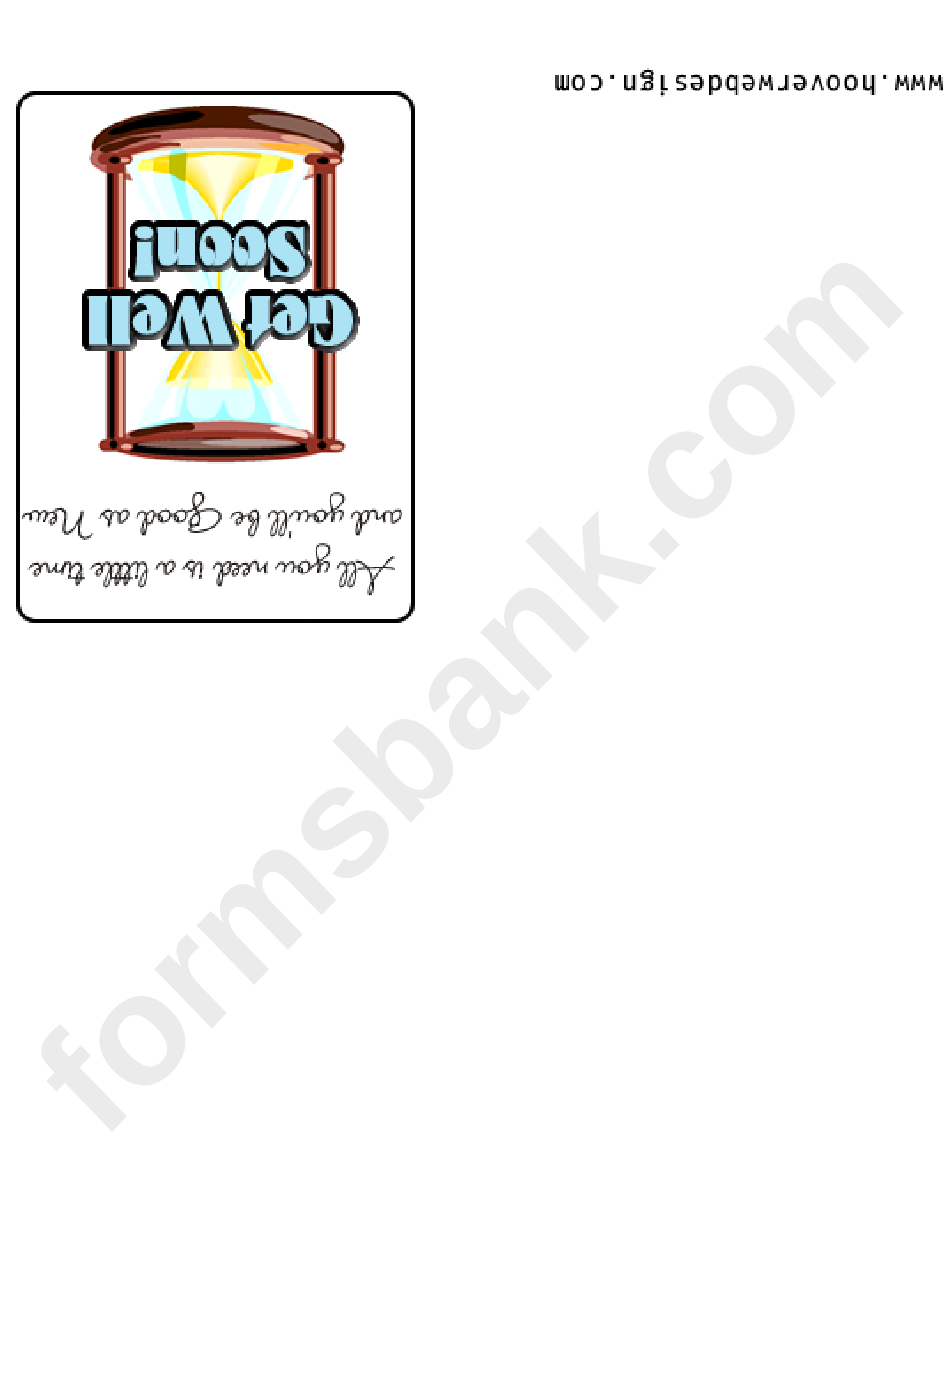 Get Well Good As New - Greeting Card Template